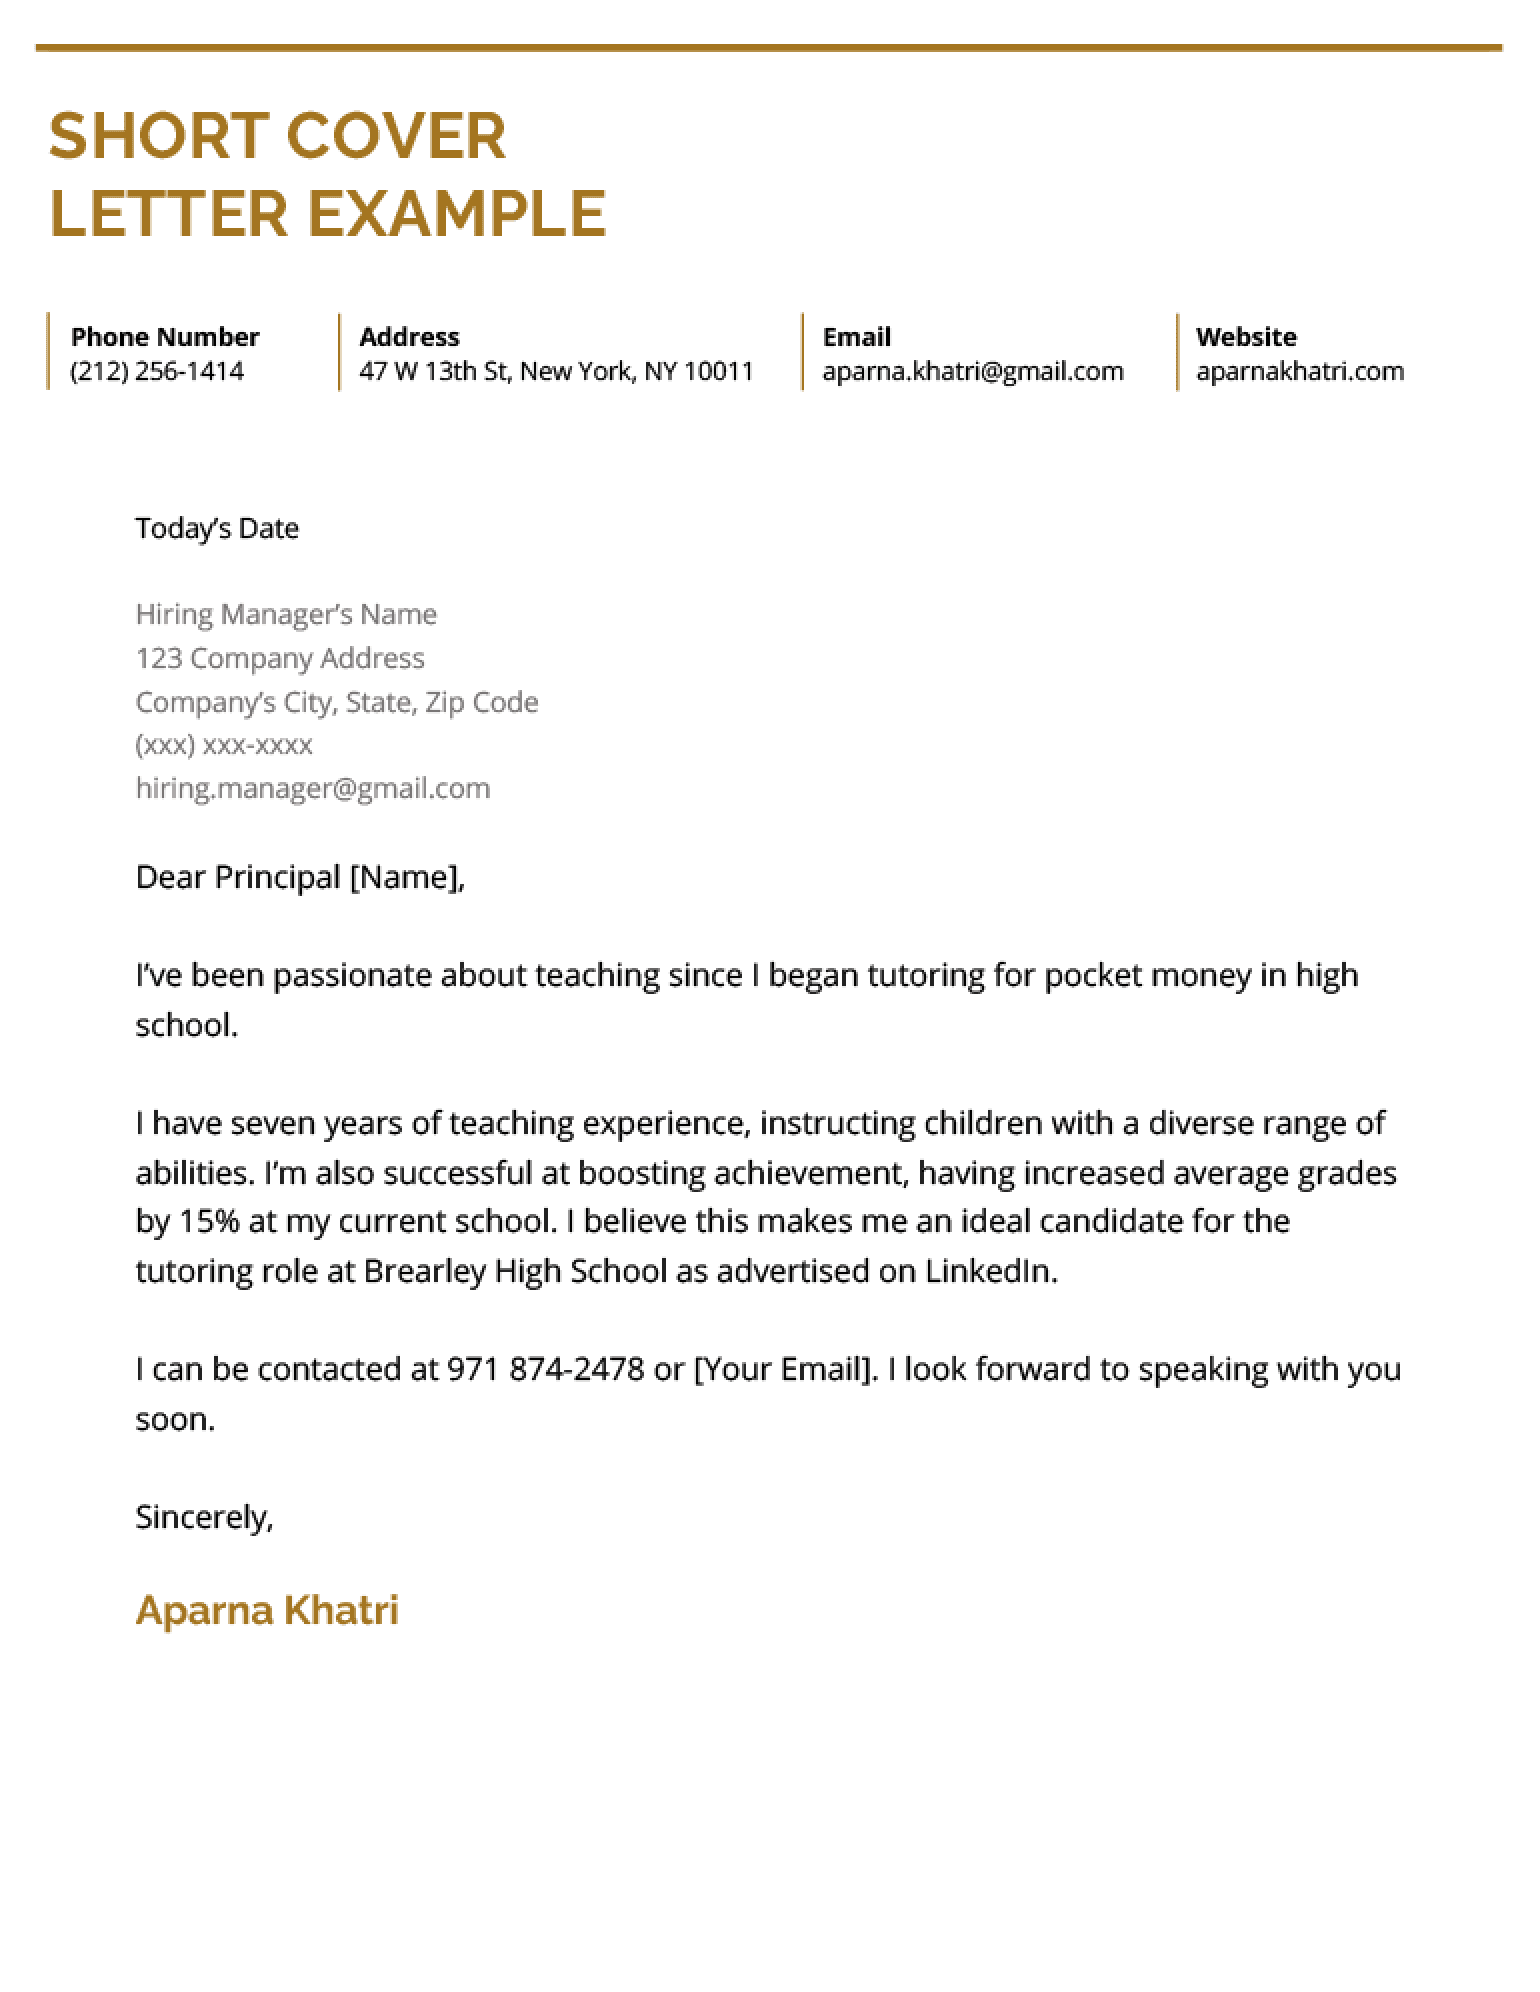 Short cover letter sample with a yellow header background